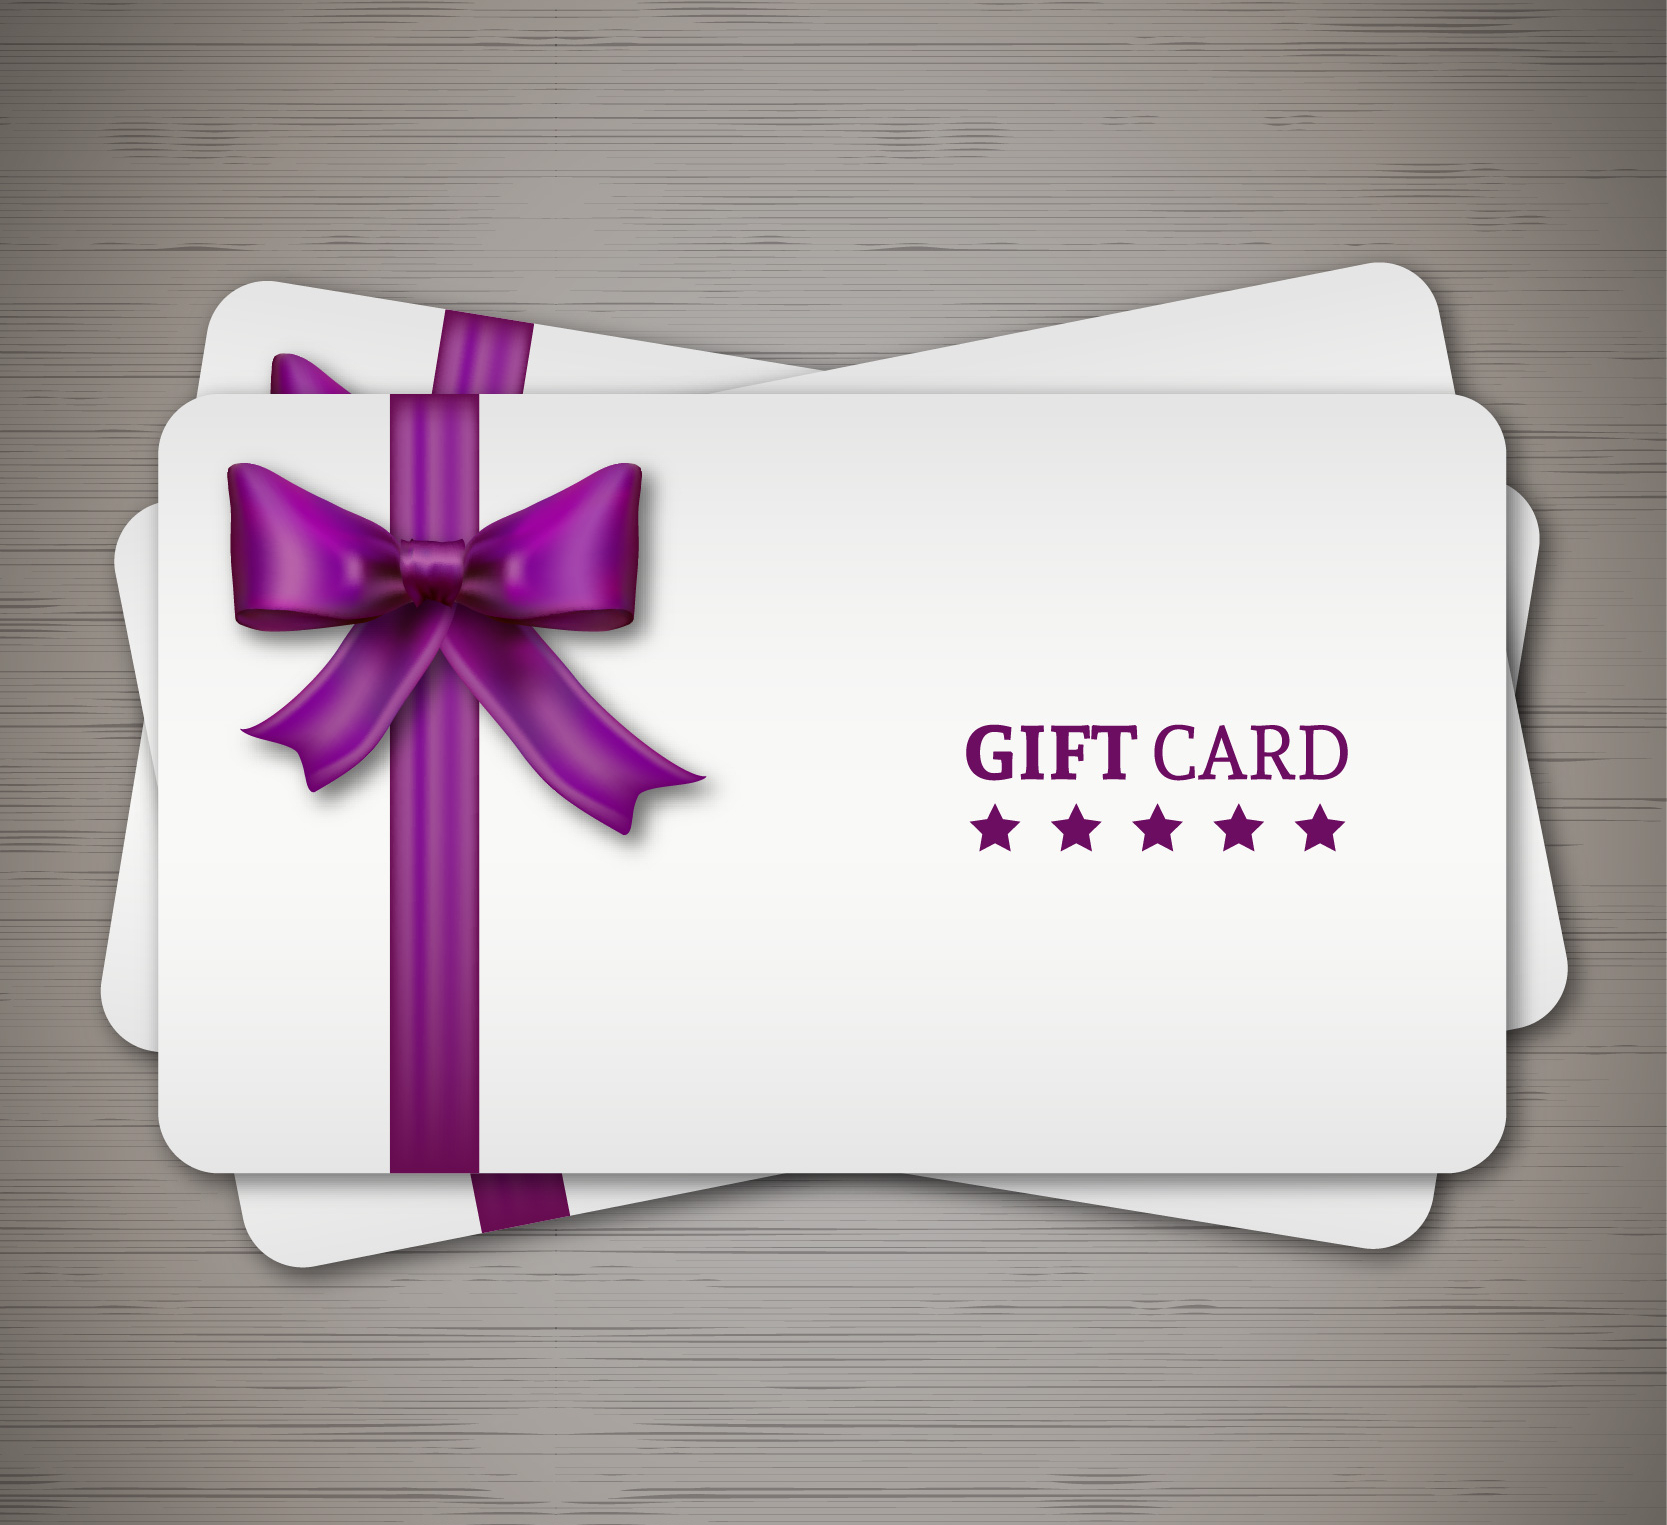 Gift Card – $200 - The Web Design Agency